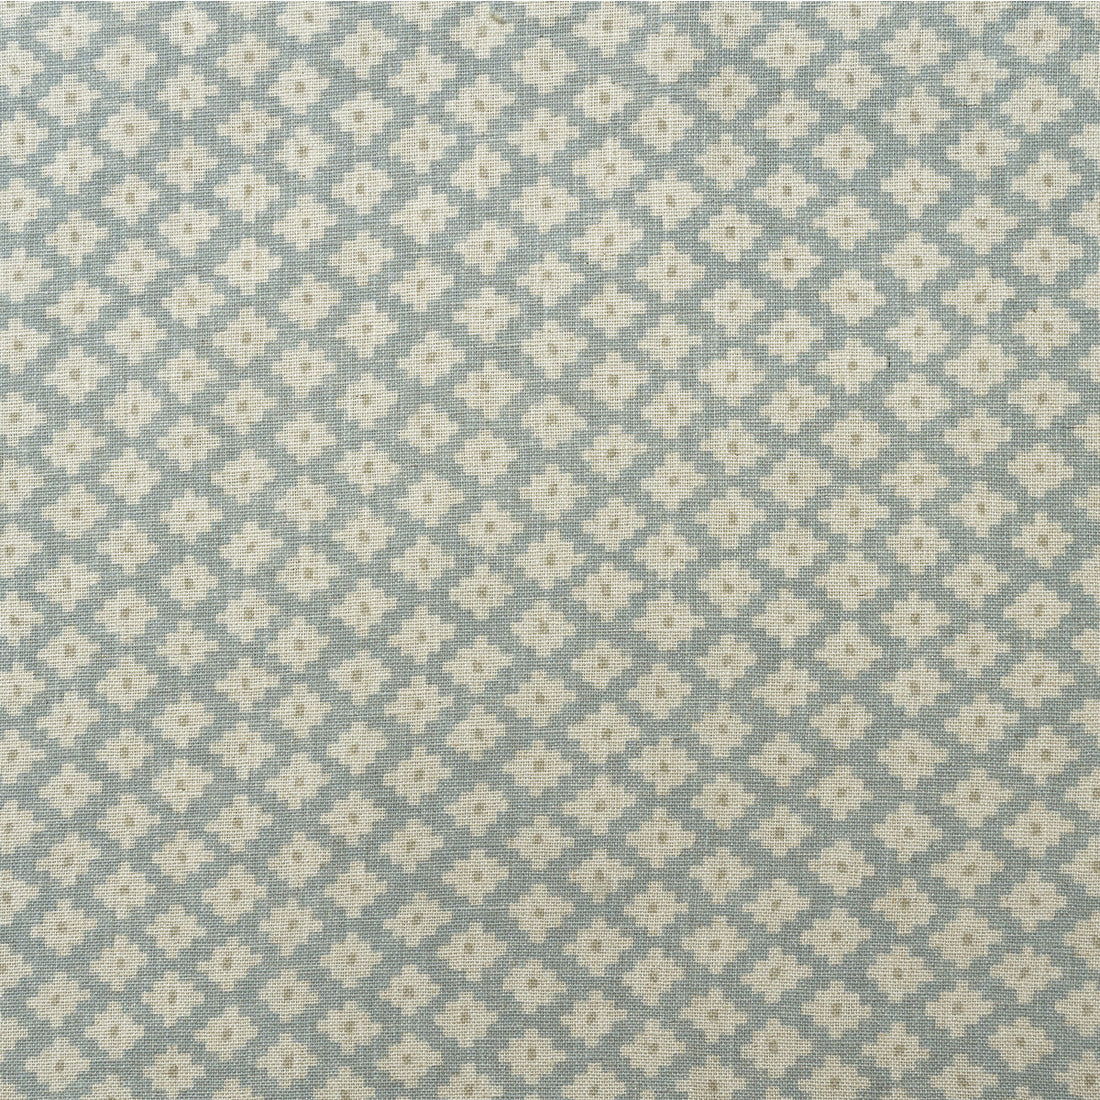 Maze fabric in sky color - pattern AM100381.15.0 - by Kravet Couture in the Andrew Martin Garden Path collection